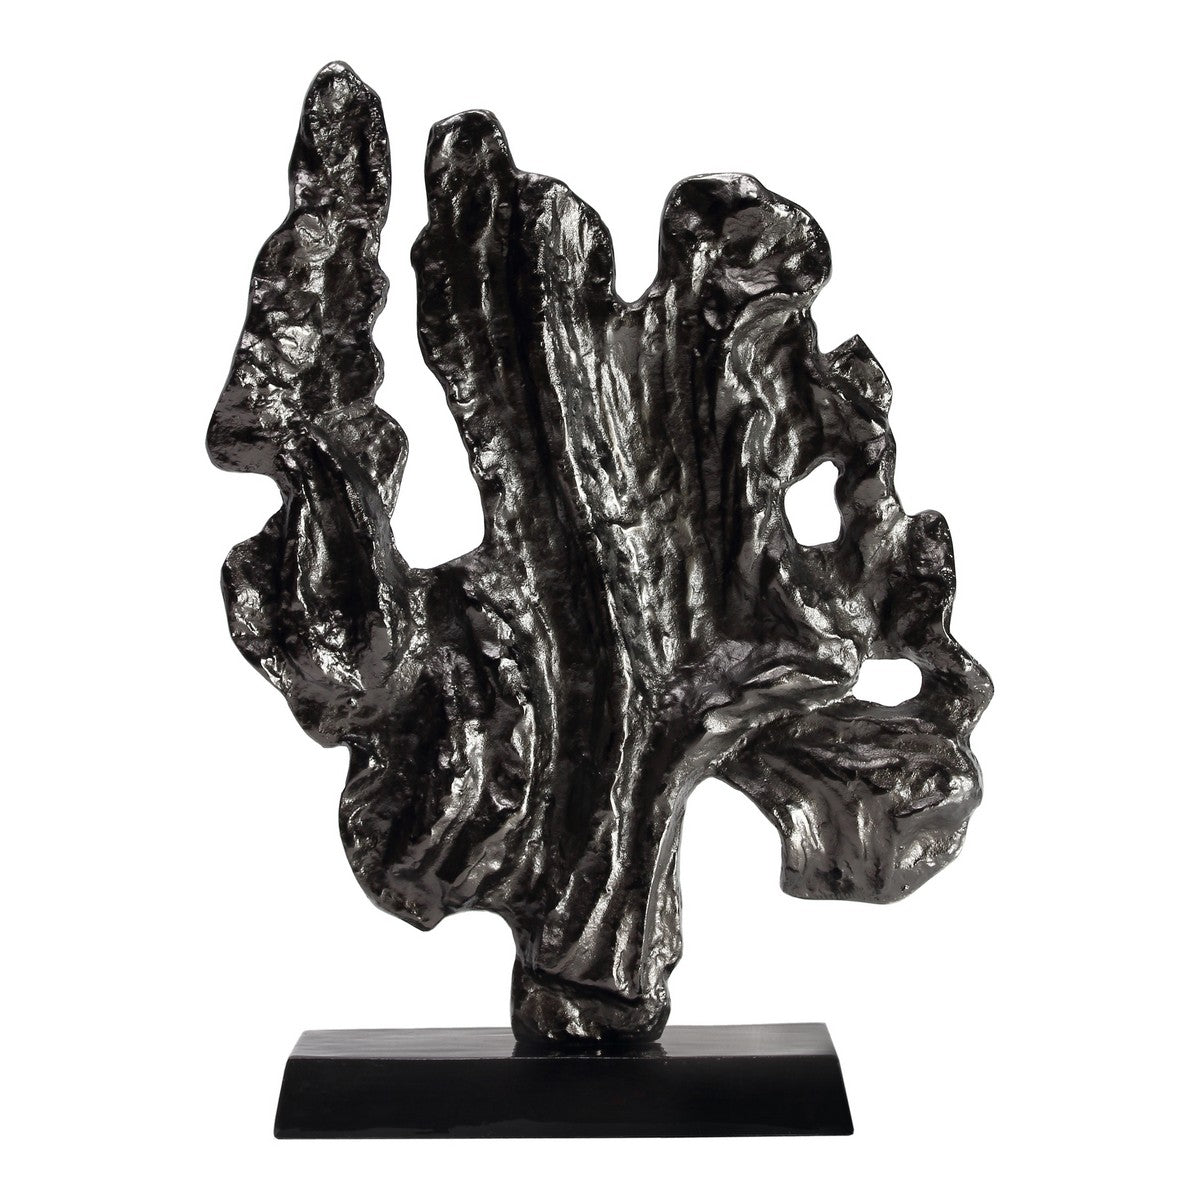 Moe's Home Collection Coral Sculpture Large Black Nickel - IX-1115-02